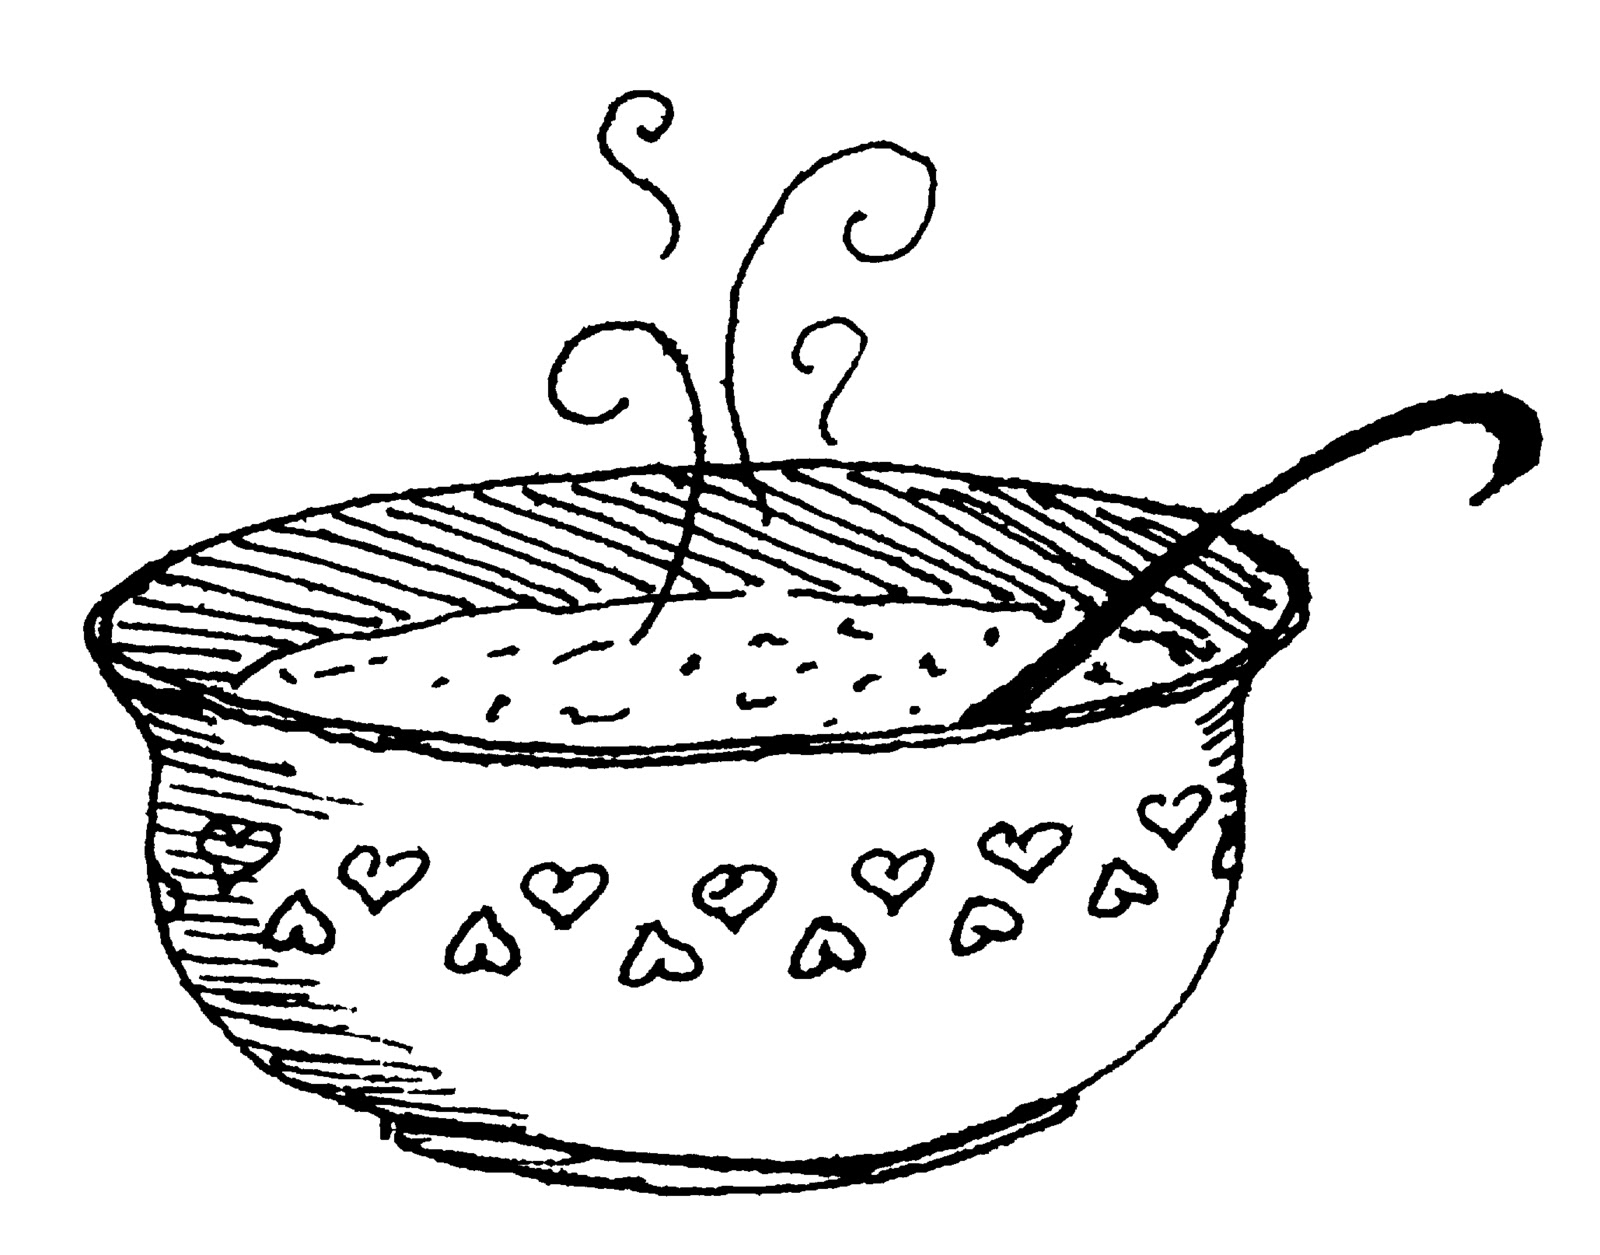 Stew clipart black and white